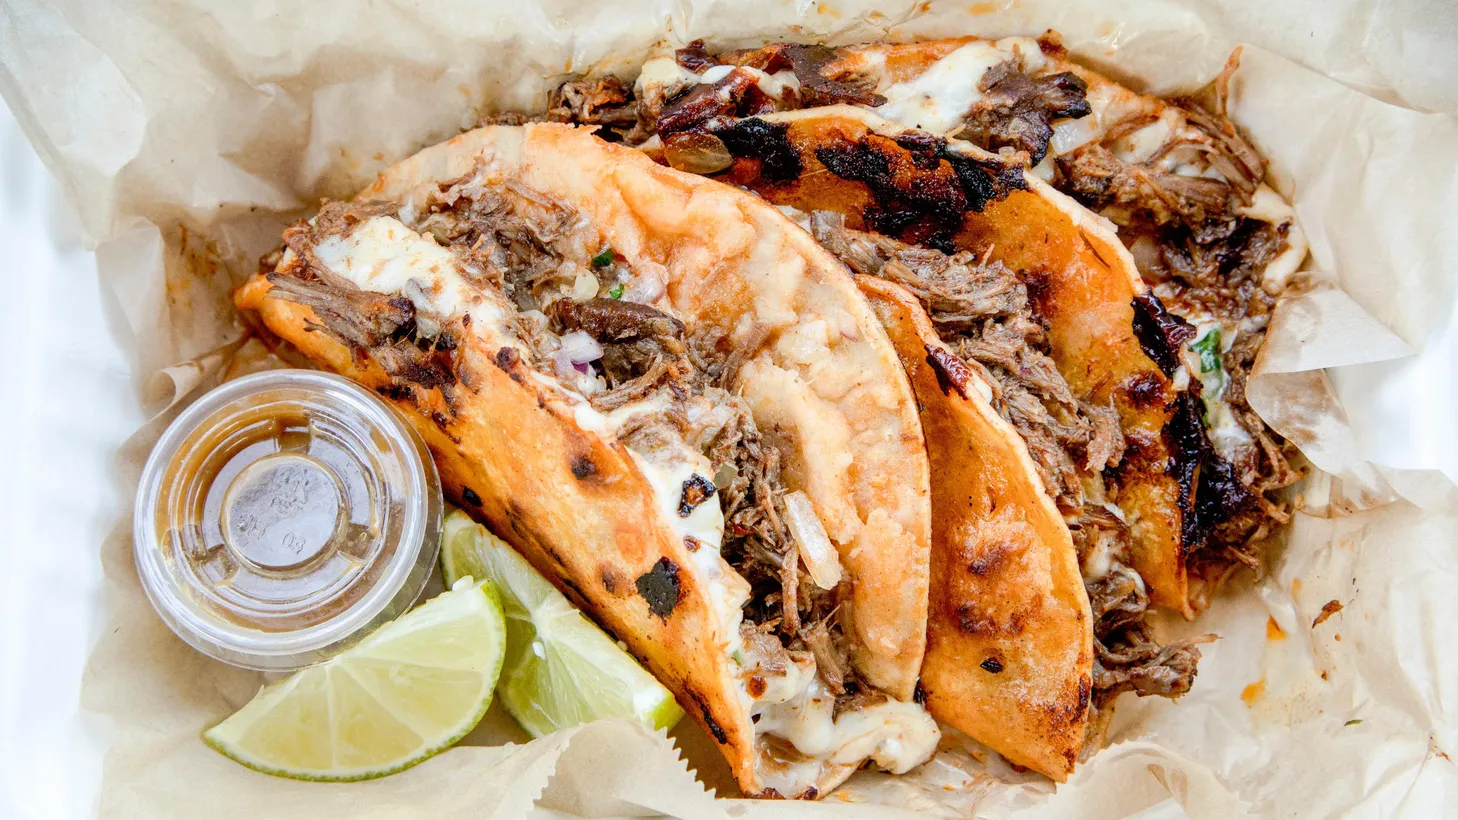 With its reddish-orange stained tortilla filled with birria and crisped on the griddle, the quesabirria from La Olla is one of Bill Addison’s favorite dishes at the newly opened Blossom Market Hall.